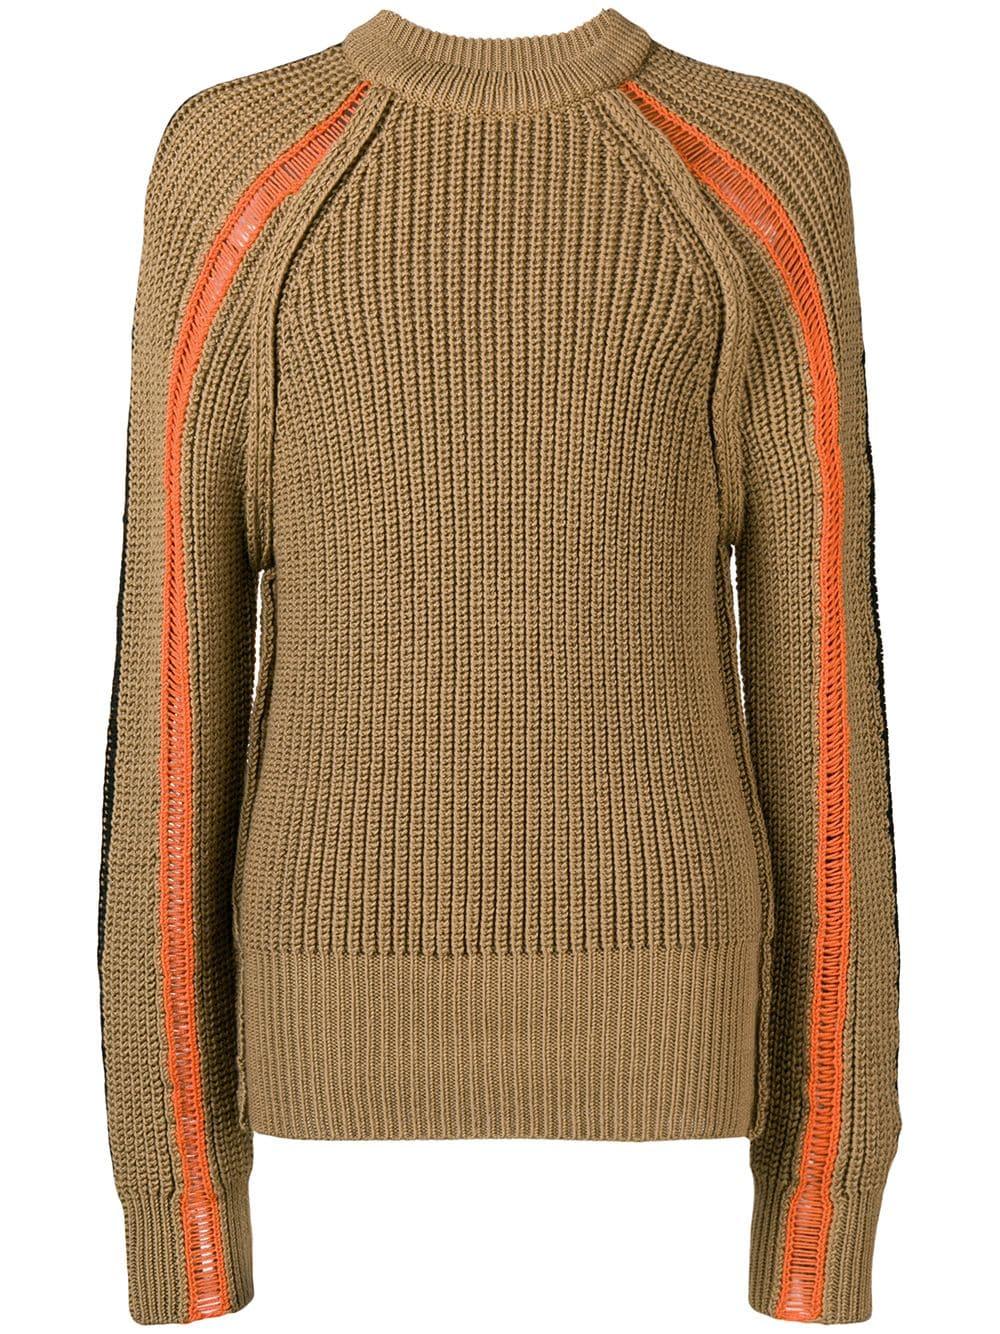 Maison Margiela Chunky Knit Crew Neck Sweater in Brown for Men - Lyst